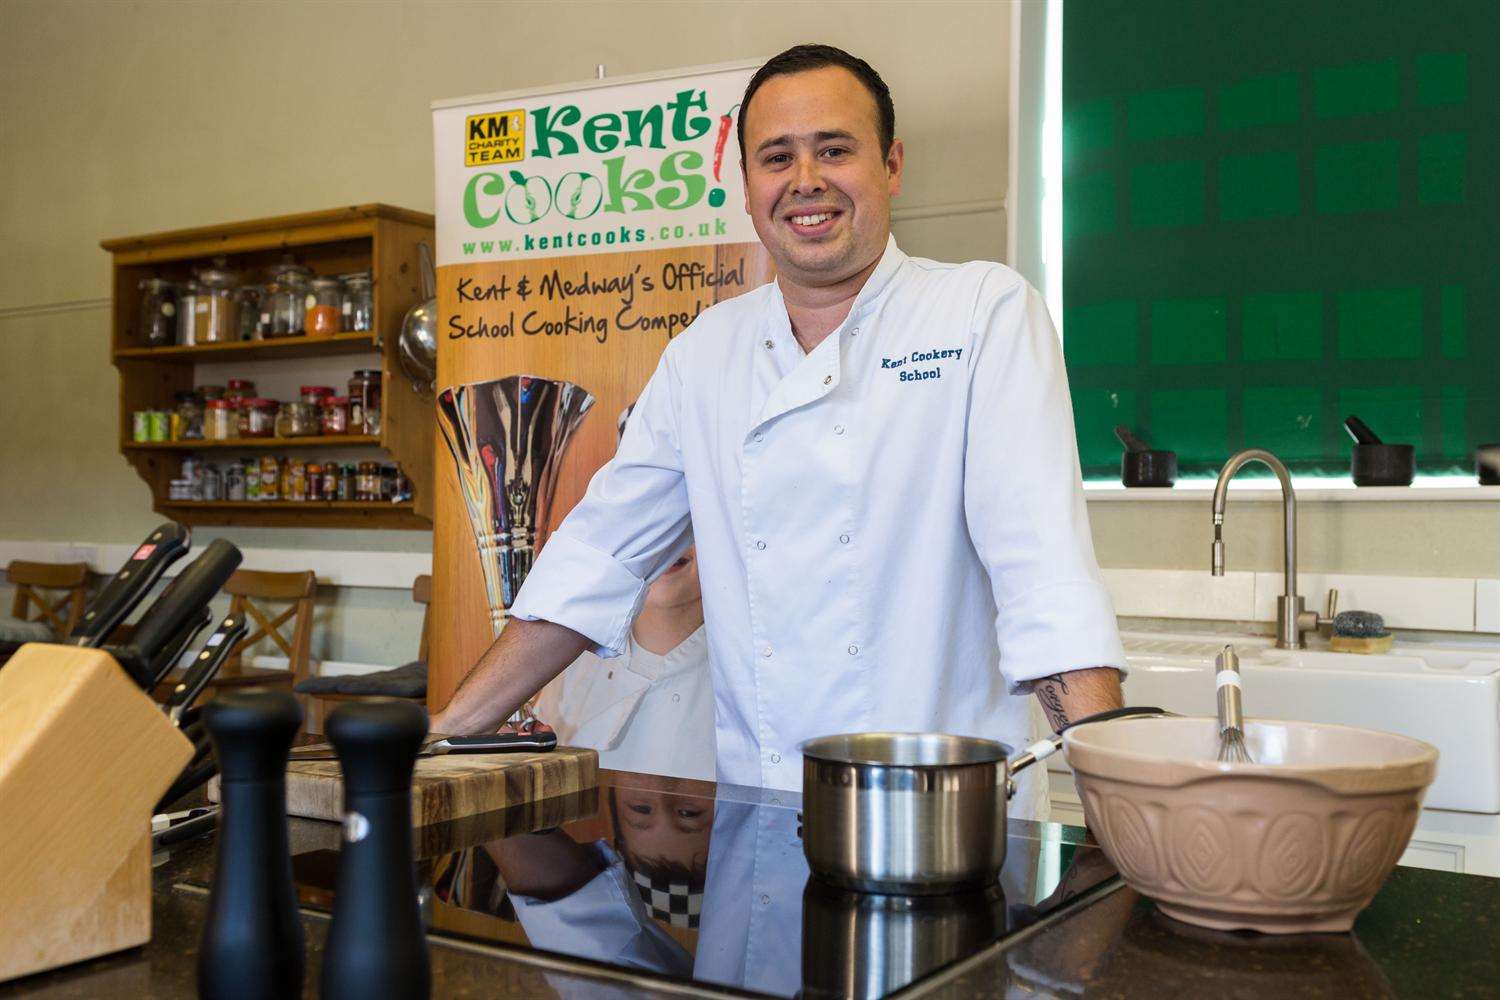 Daniel Kennedy of Kent Cookery School, partners for KM Kent Cooks, the official school cookery competition.